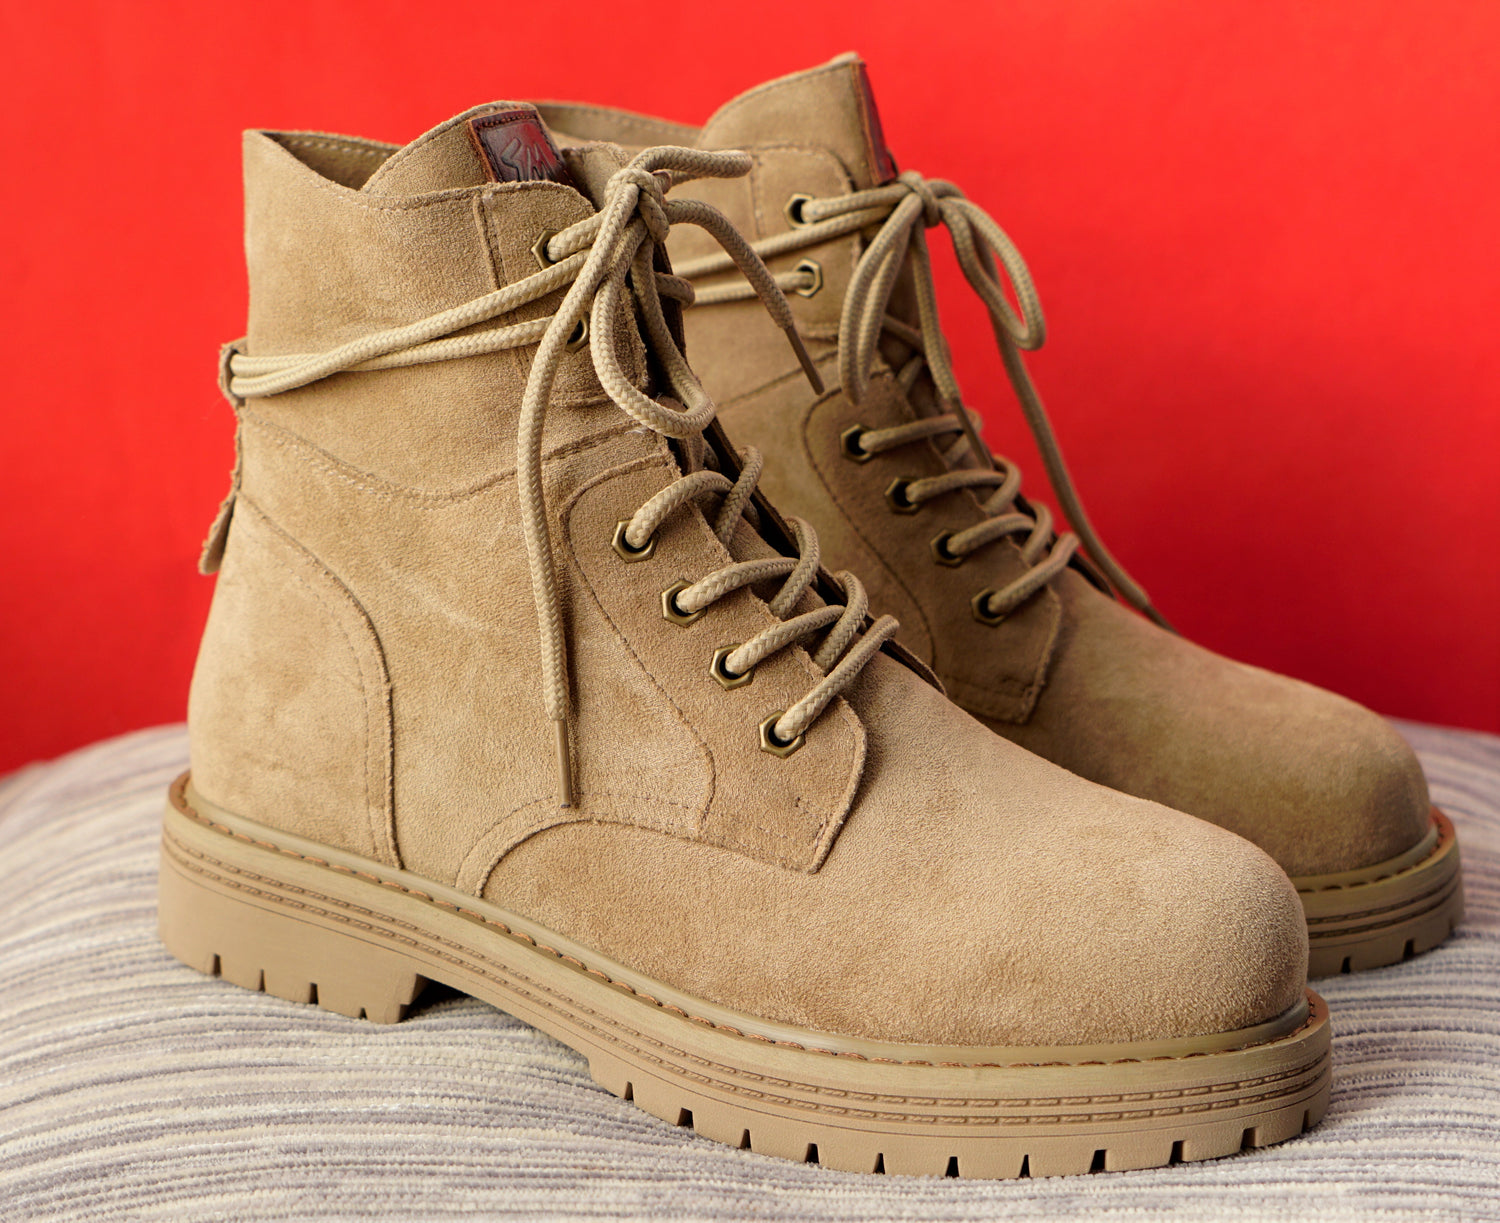 Unisex Suede Leather Hiking Ankle Boots - Eugenia Molina